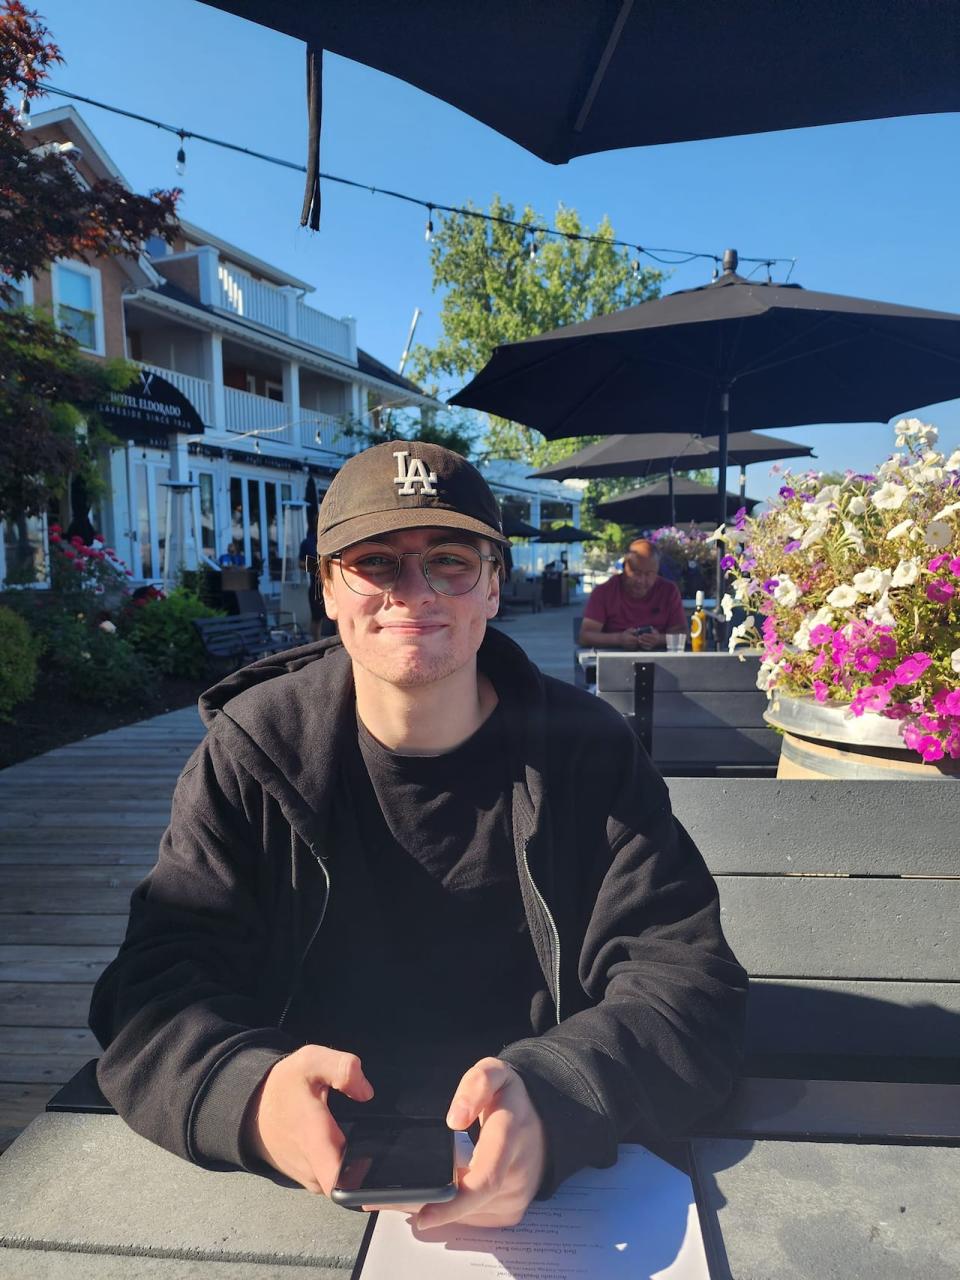 Tristan Seeger, 15, succumbed to his injuries after he was struck by a vehicle on Saturday, Oct. 21, 2023, according to Mounties and his family. (Paule Seeger/Facebook - image credit)